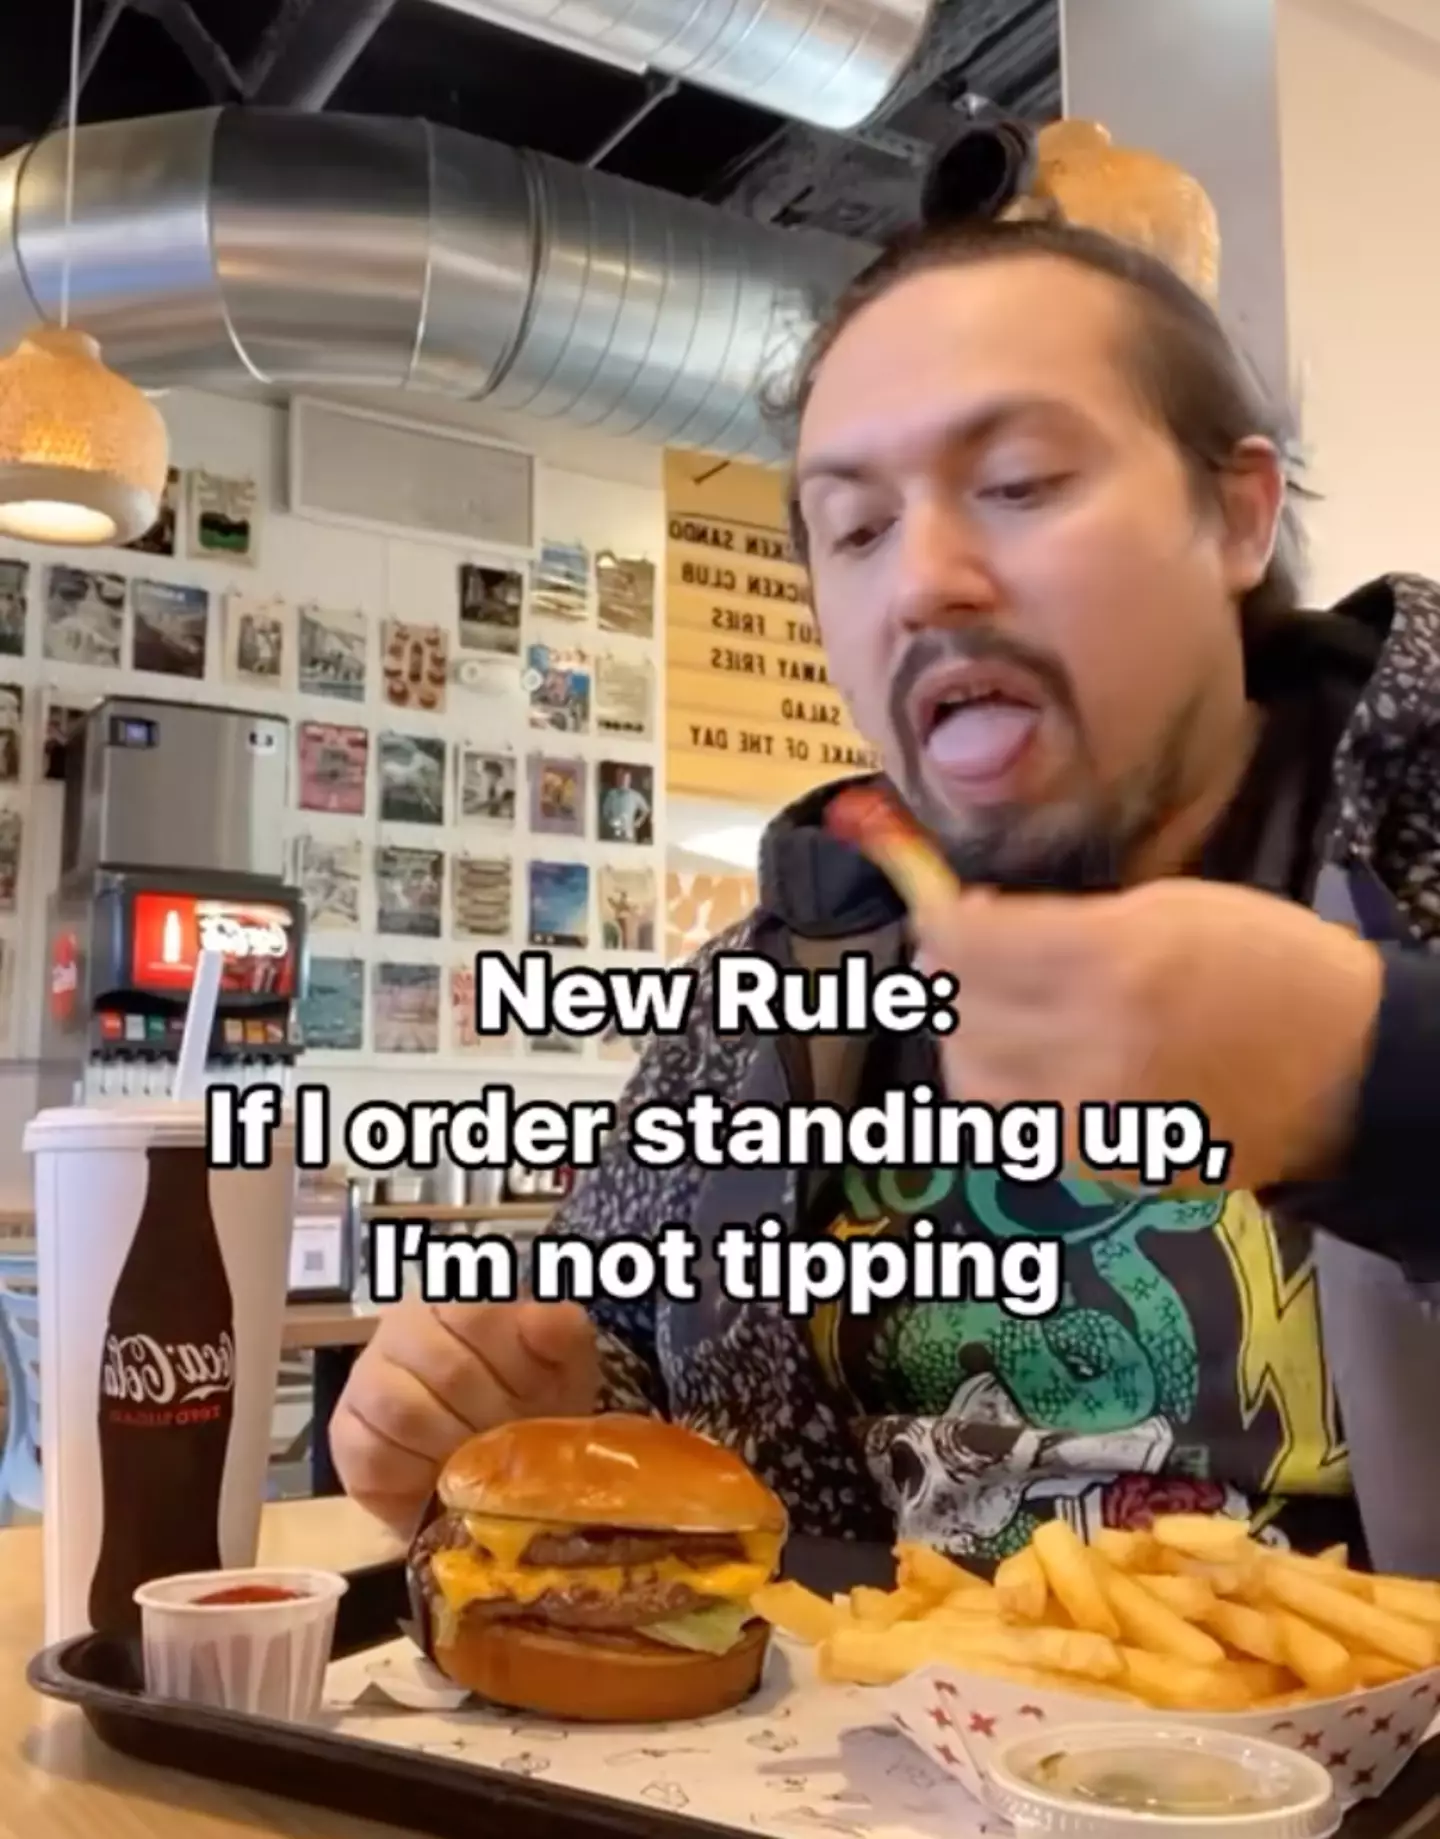 Many in the comment section did agree with him and questioned why they should be paying for a service through tipping.(robert_calver/TikTok)